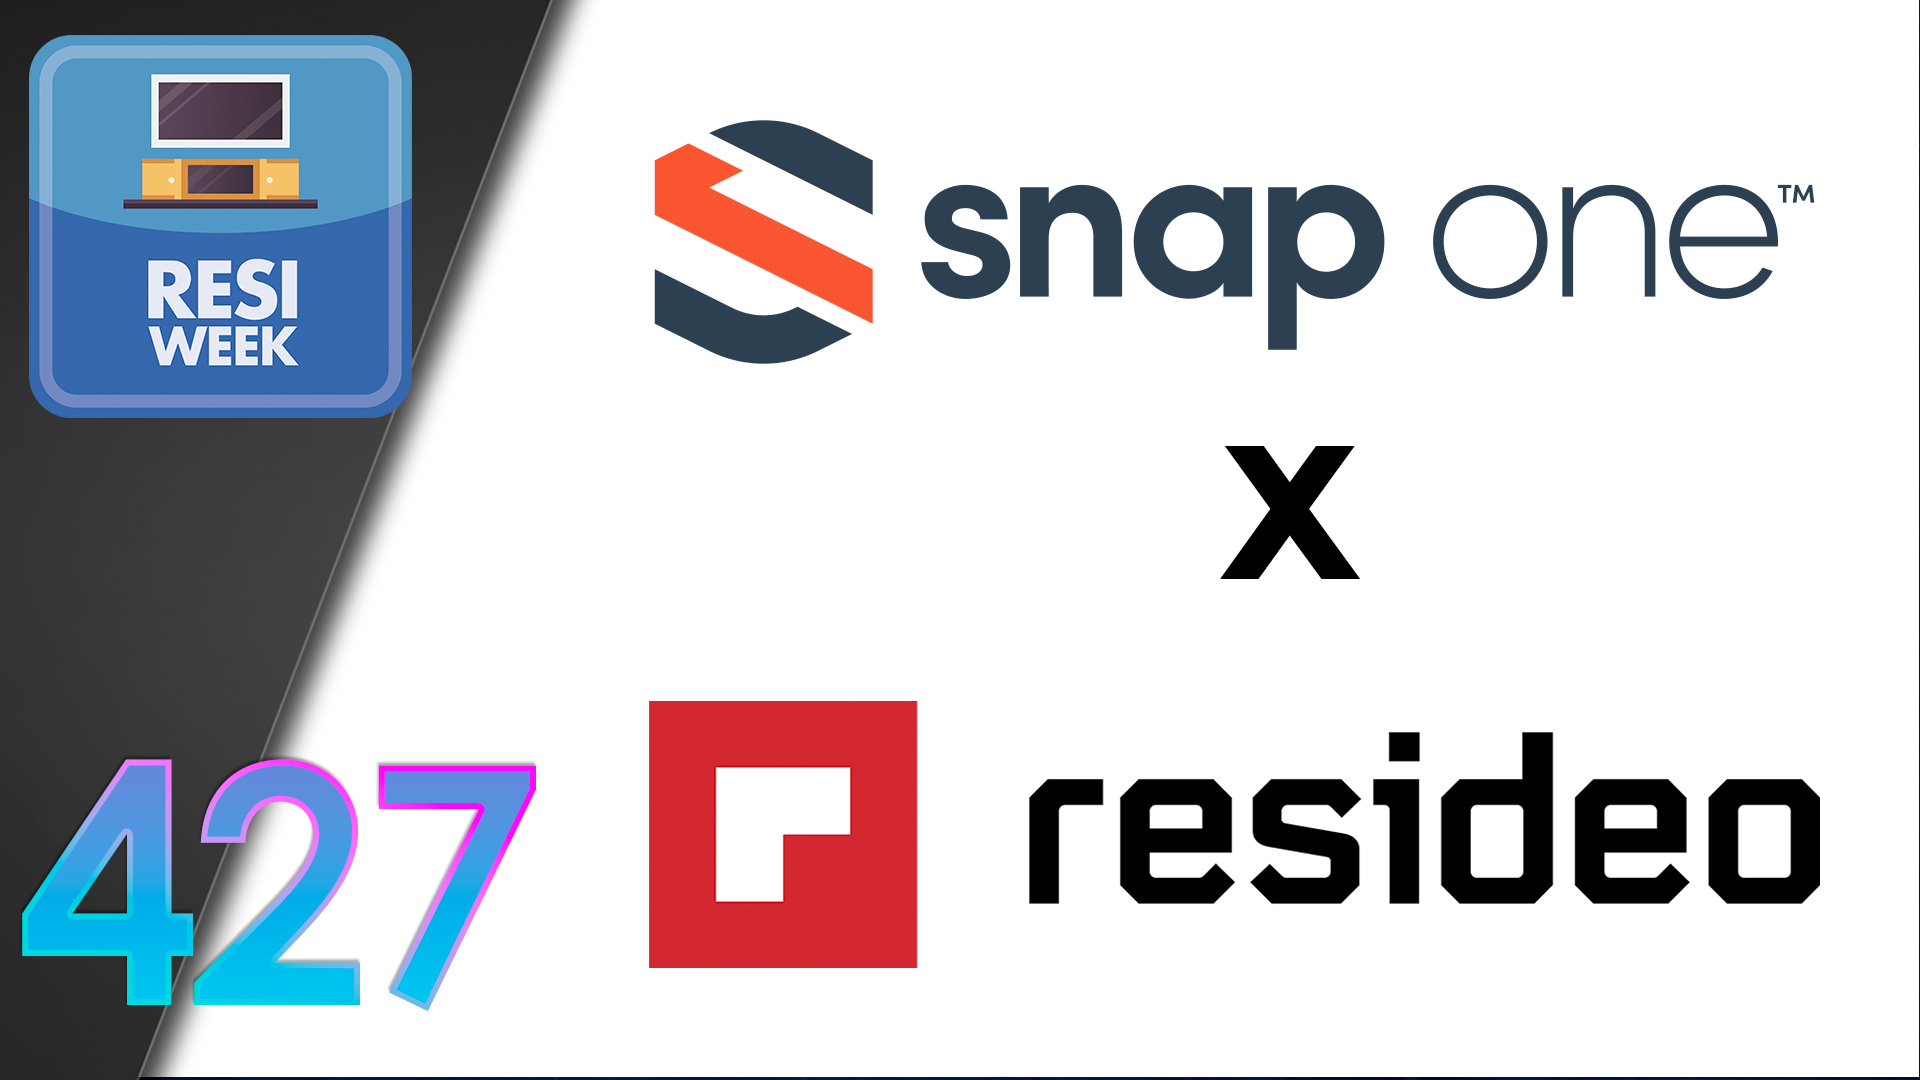 Resideo Acquires Snap One